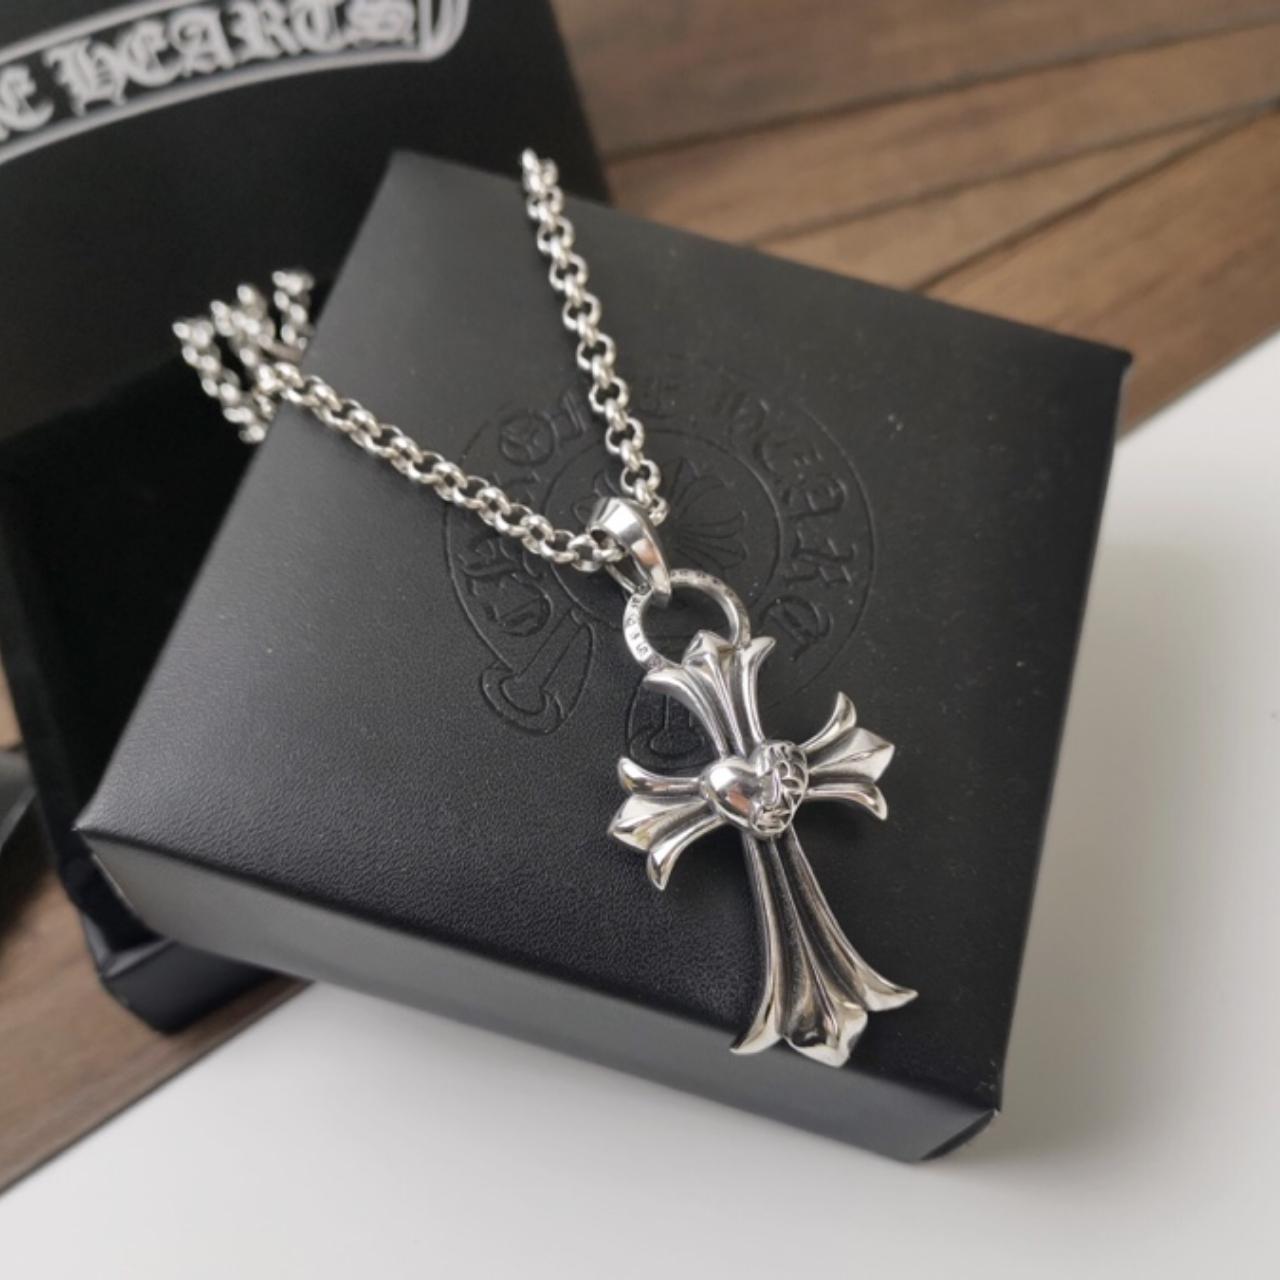 Brilliance Crystal Infinity Heart Cross Pendant Necklace